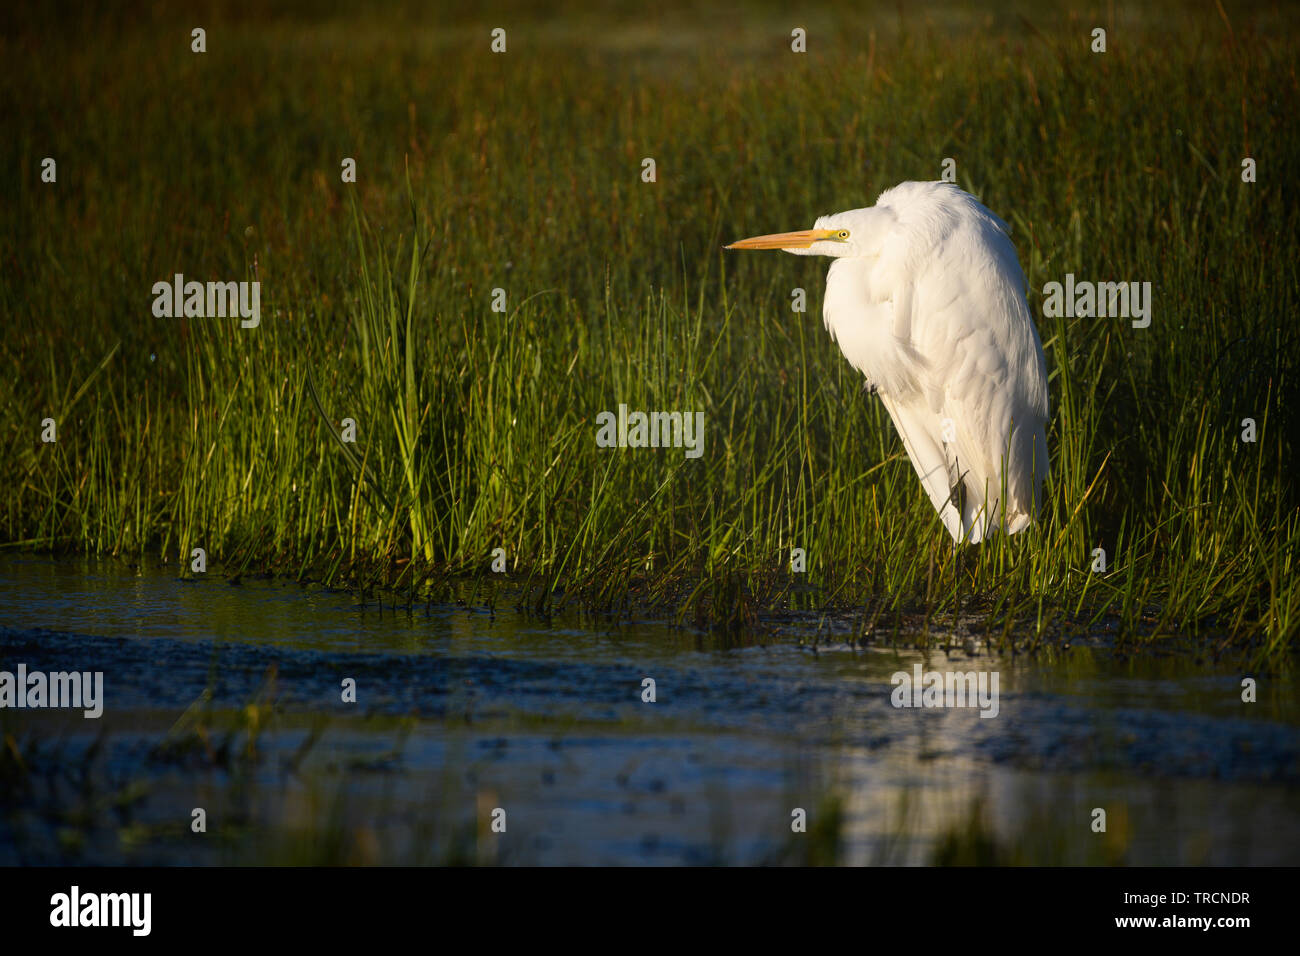 A Great Egret hunts at sunrise in Hot Creek near the town of Mammoth Lakes, in the sierra mountains of California. Hot Creek is a river that is geothe Stock Photo